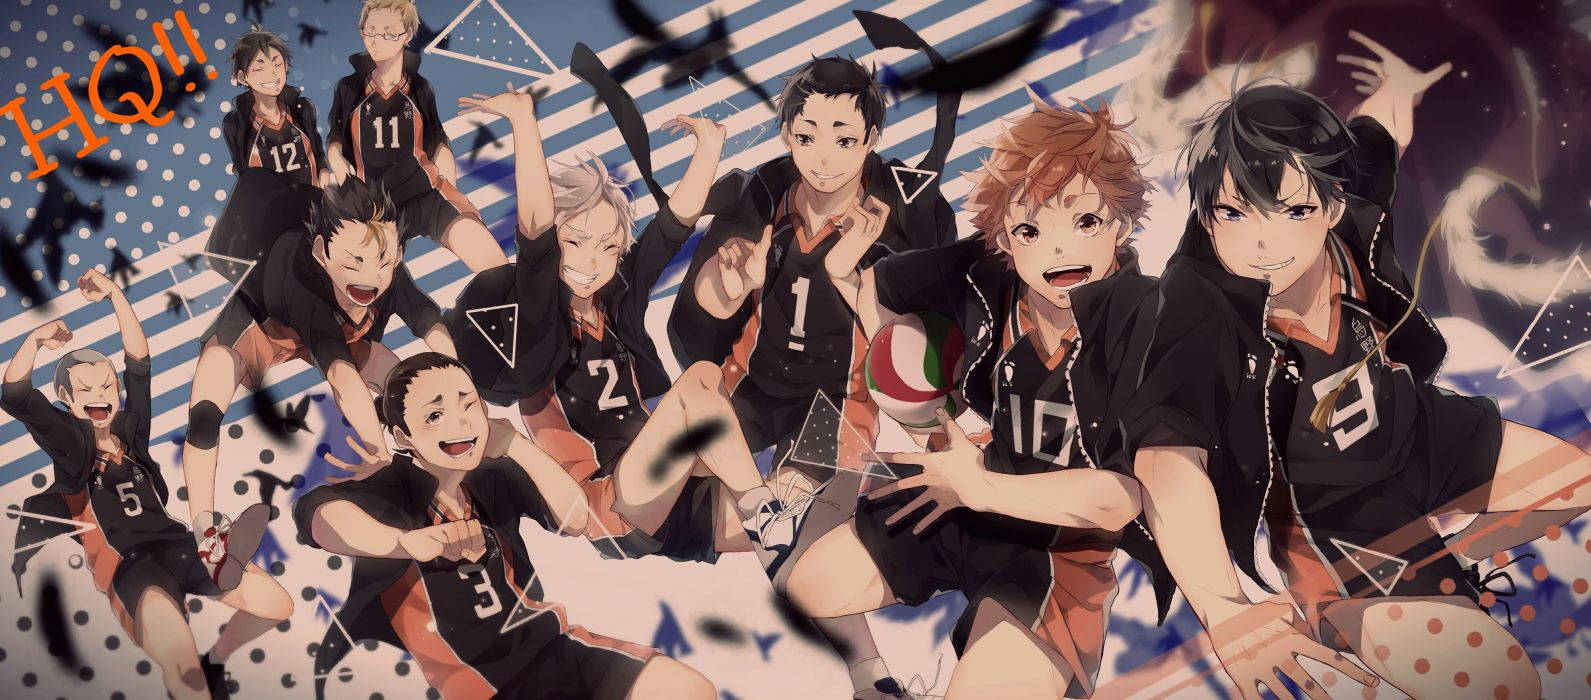 The Karasuno High volleyball team has their sights set on the top! Wallpaper